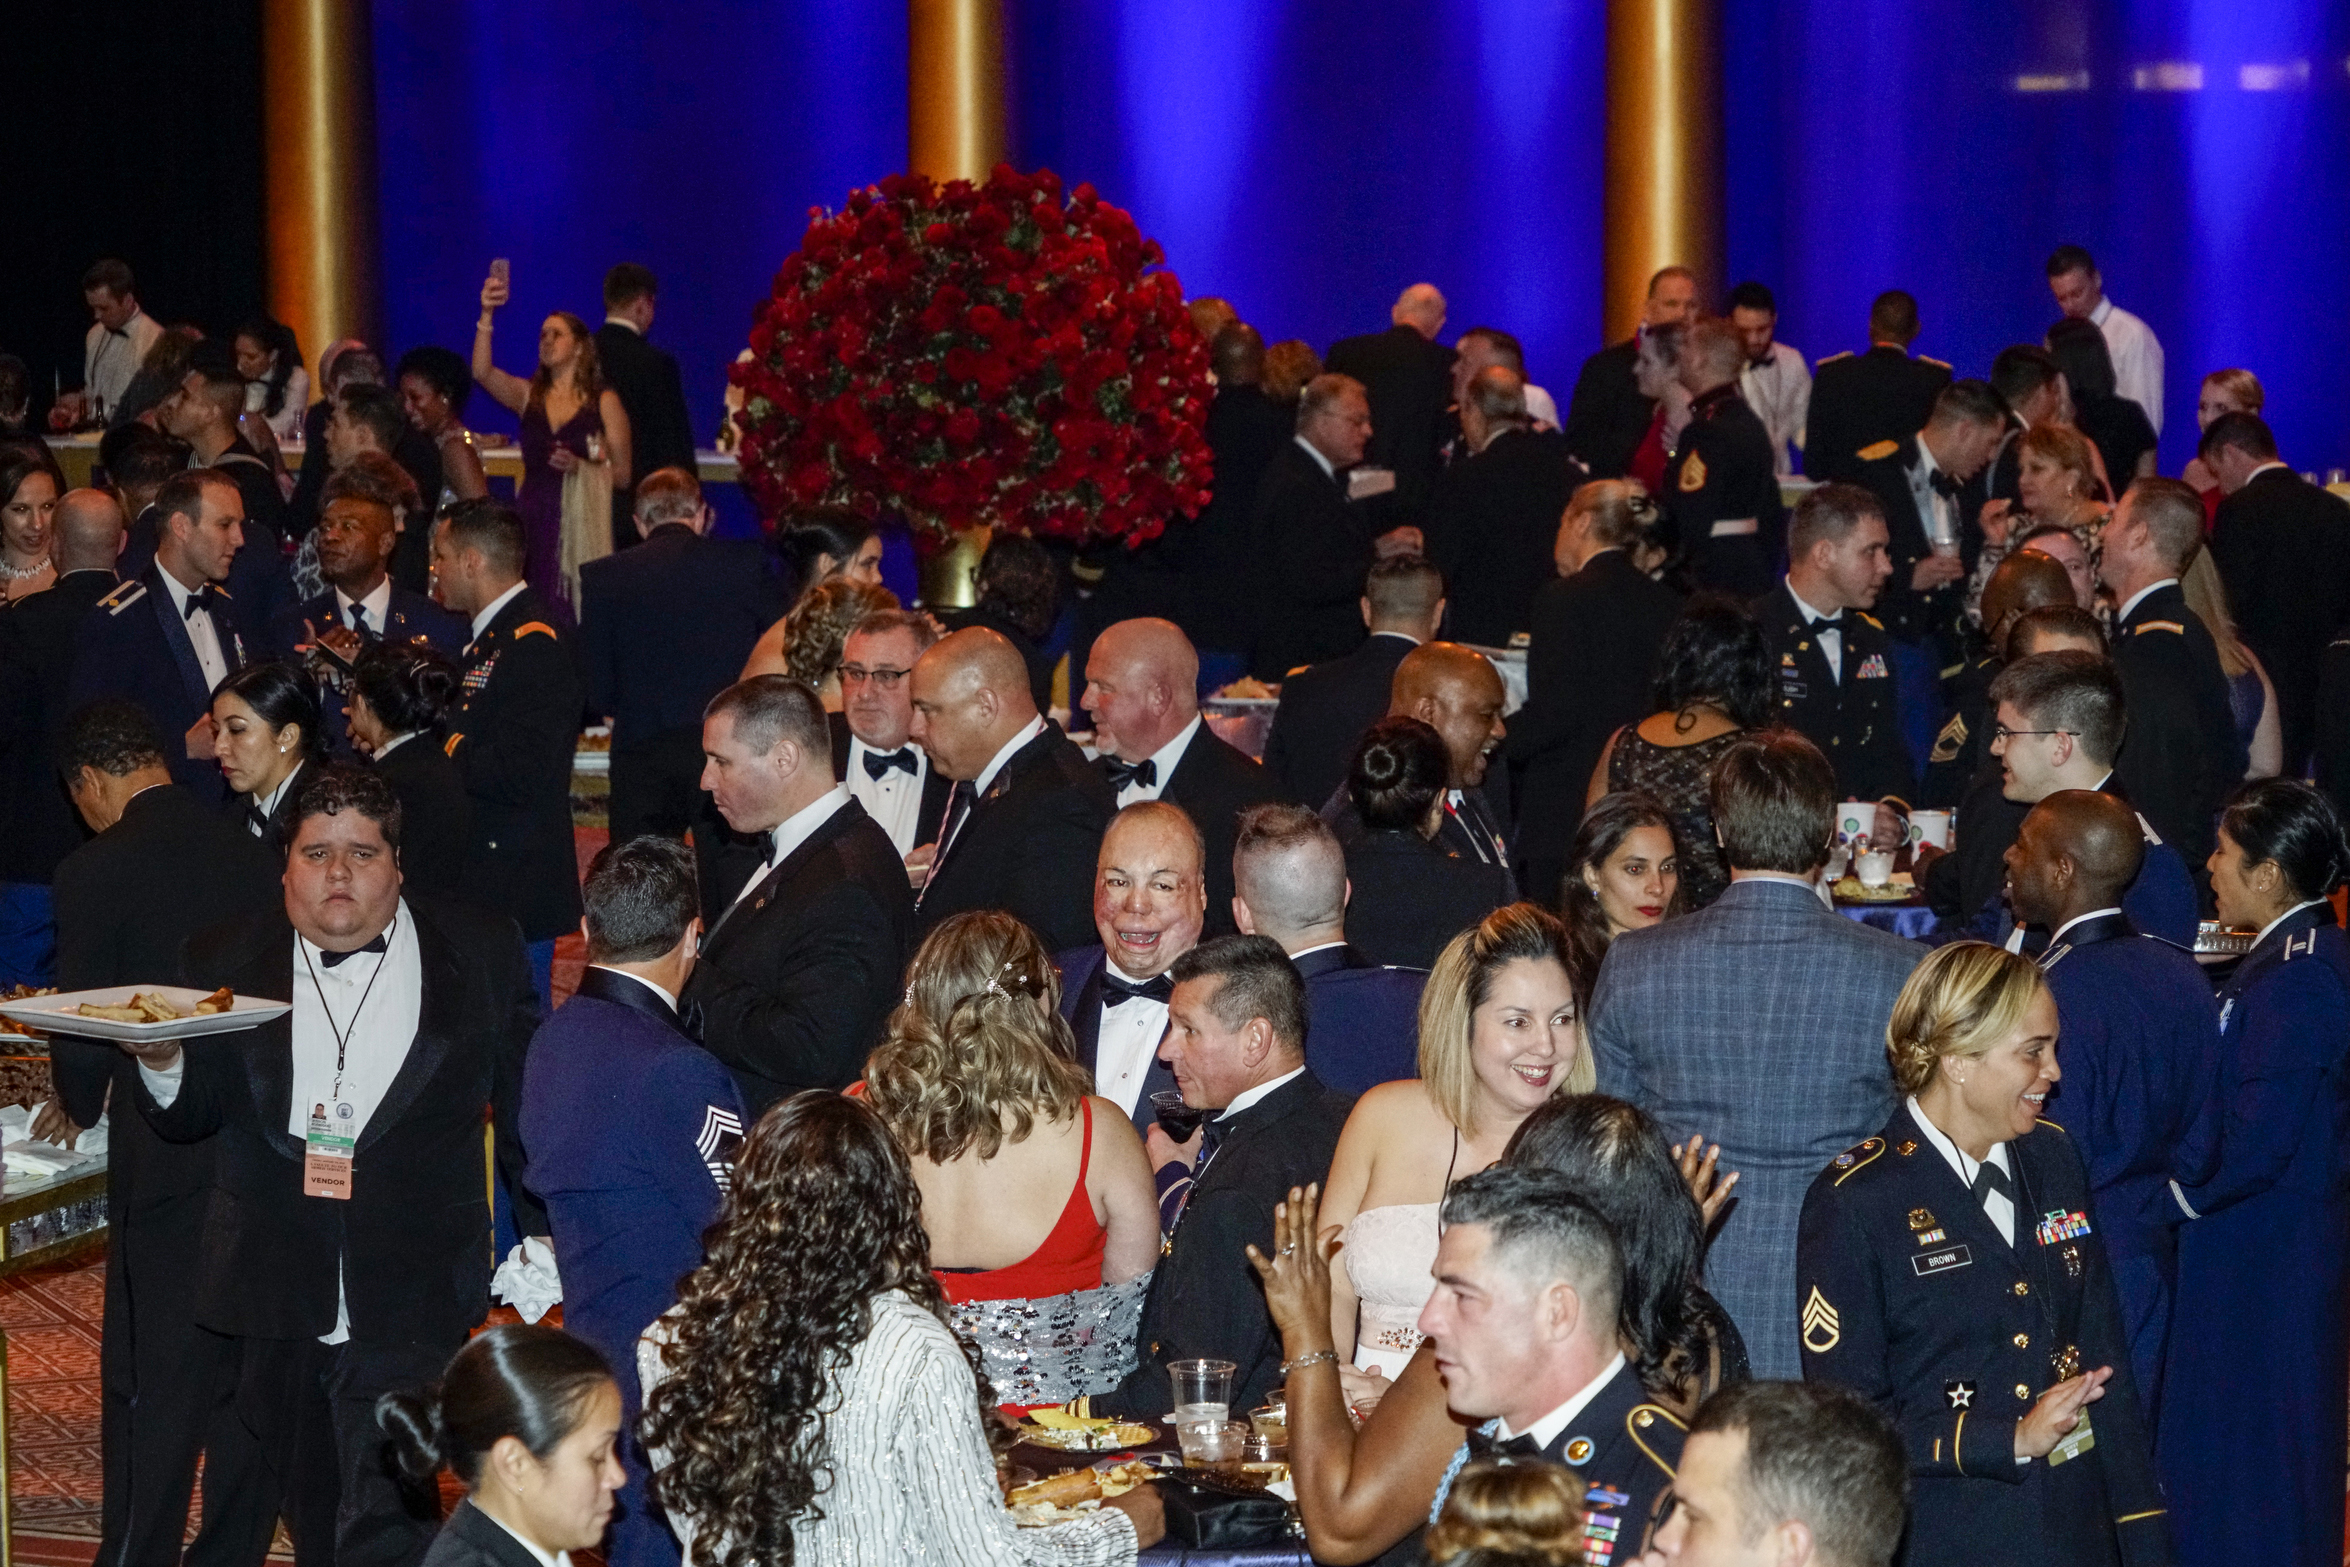 2017. Washington DC. USA.  The Presidential Inaugural Salute to our Armed Services Ball at the National Building Museum after the inauguration of Donald Trump as 45th President of the United States of America.